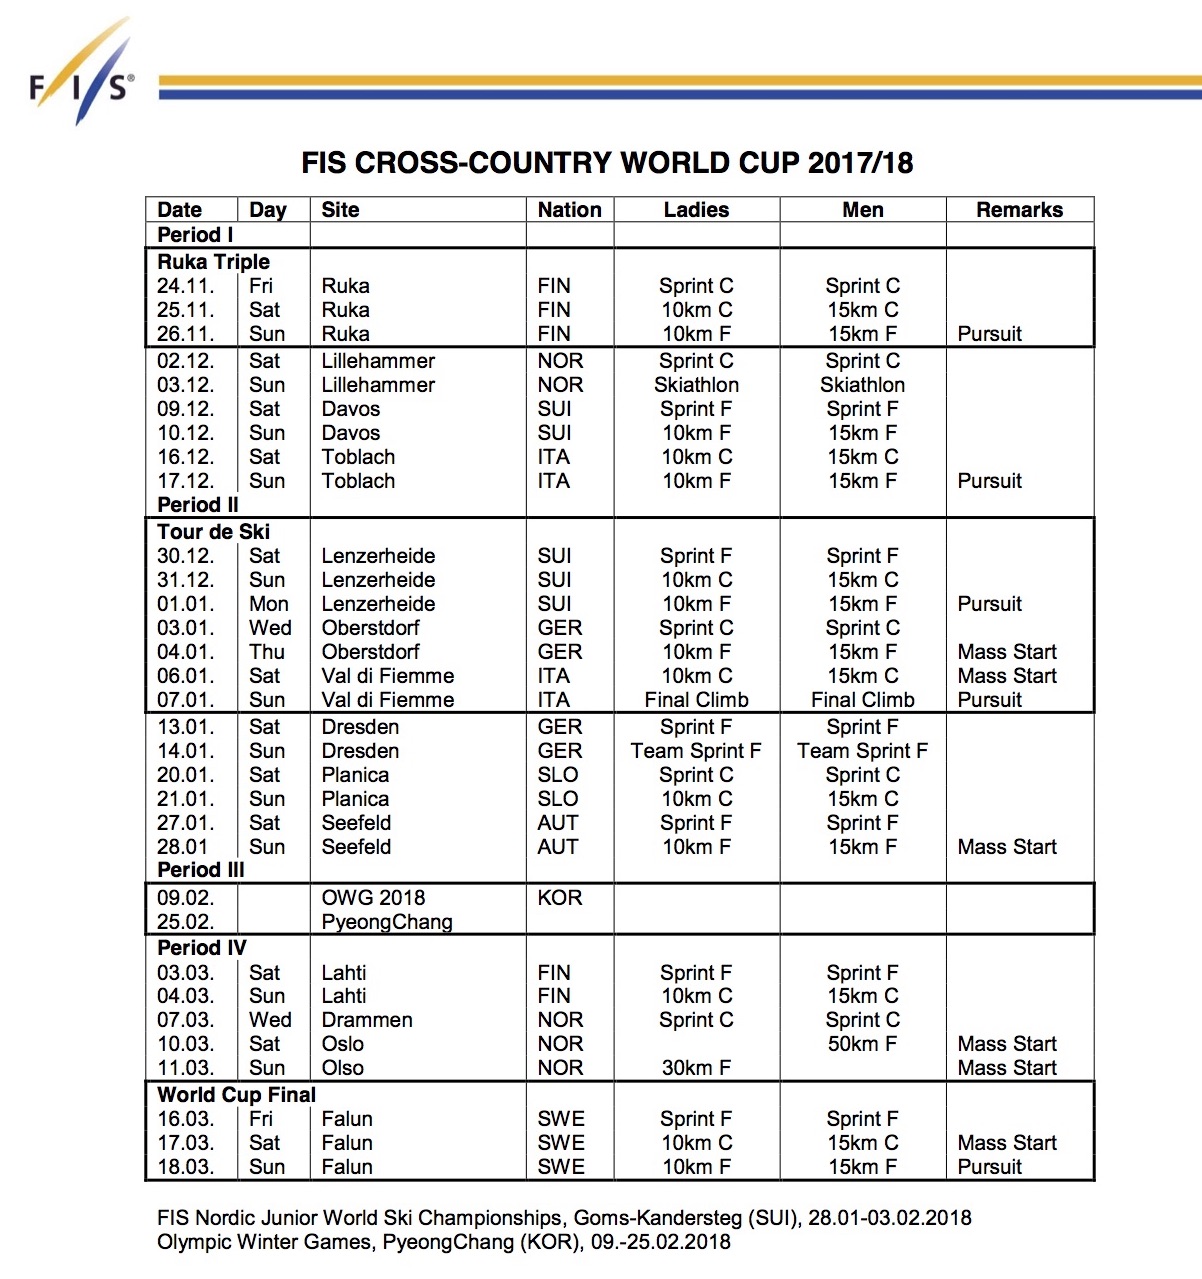 FIS XC Approves 2017/2018 World Cup Calendar